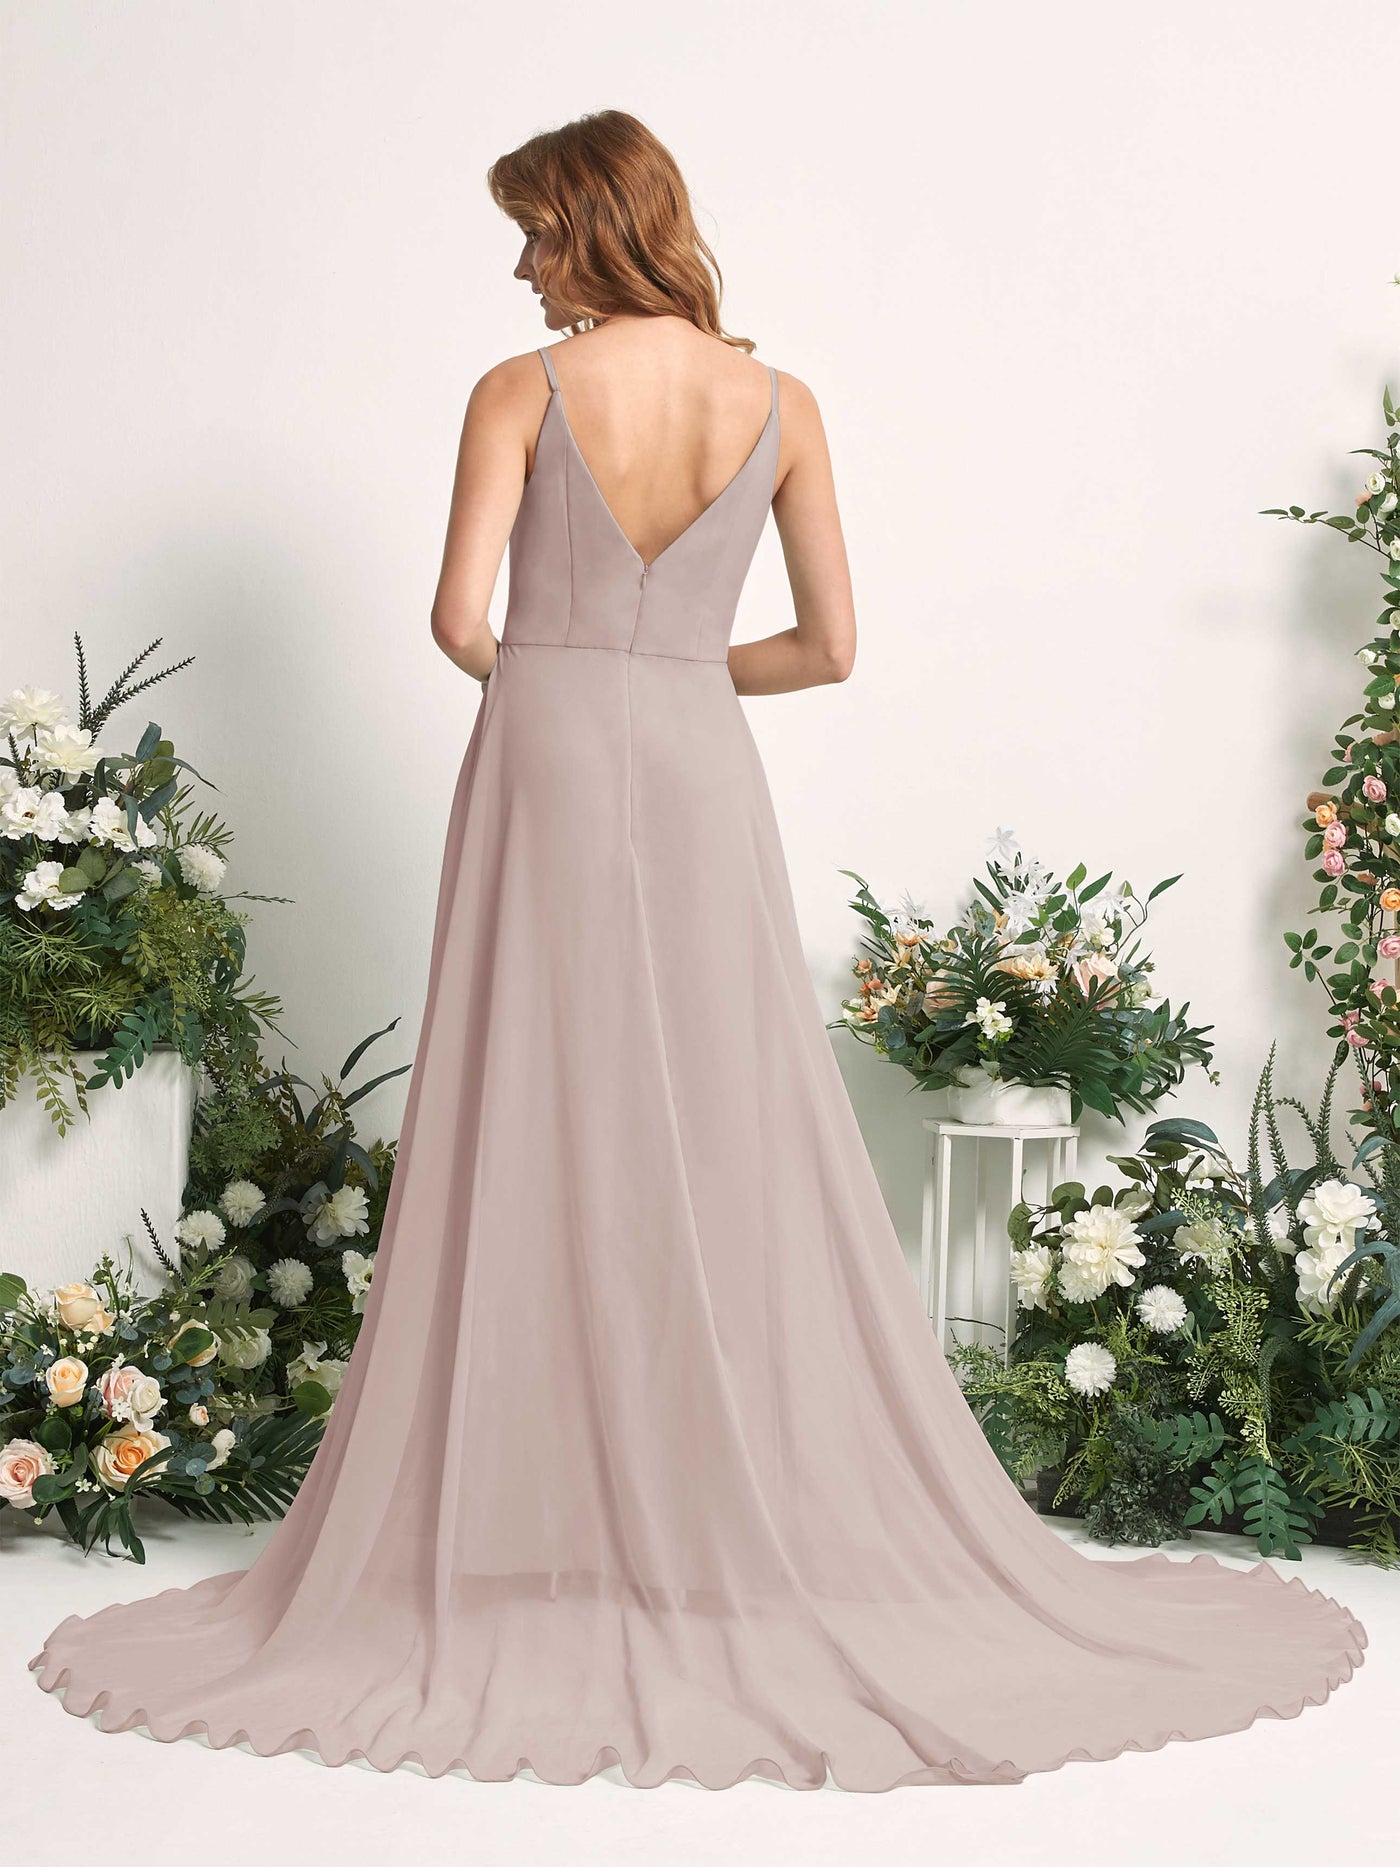 Bridesmaid Dress A-line Chiffon Spaghetti-straps Full Length Sleeveless Wedding Party Dress - Taupe (81227724)#color_taupe